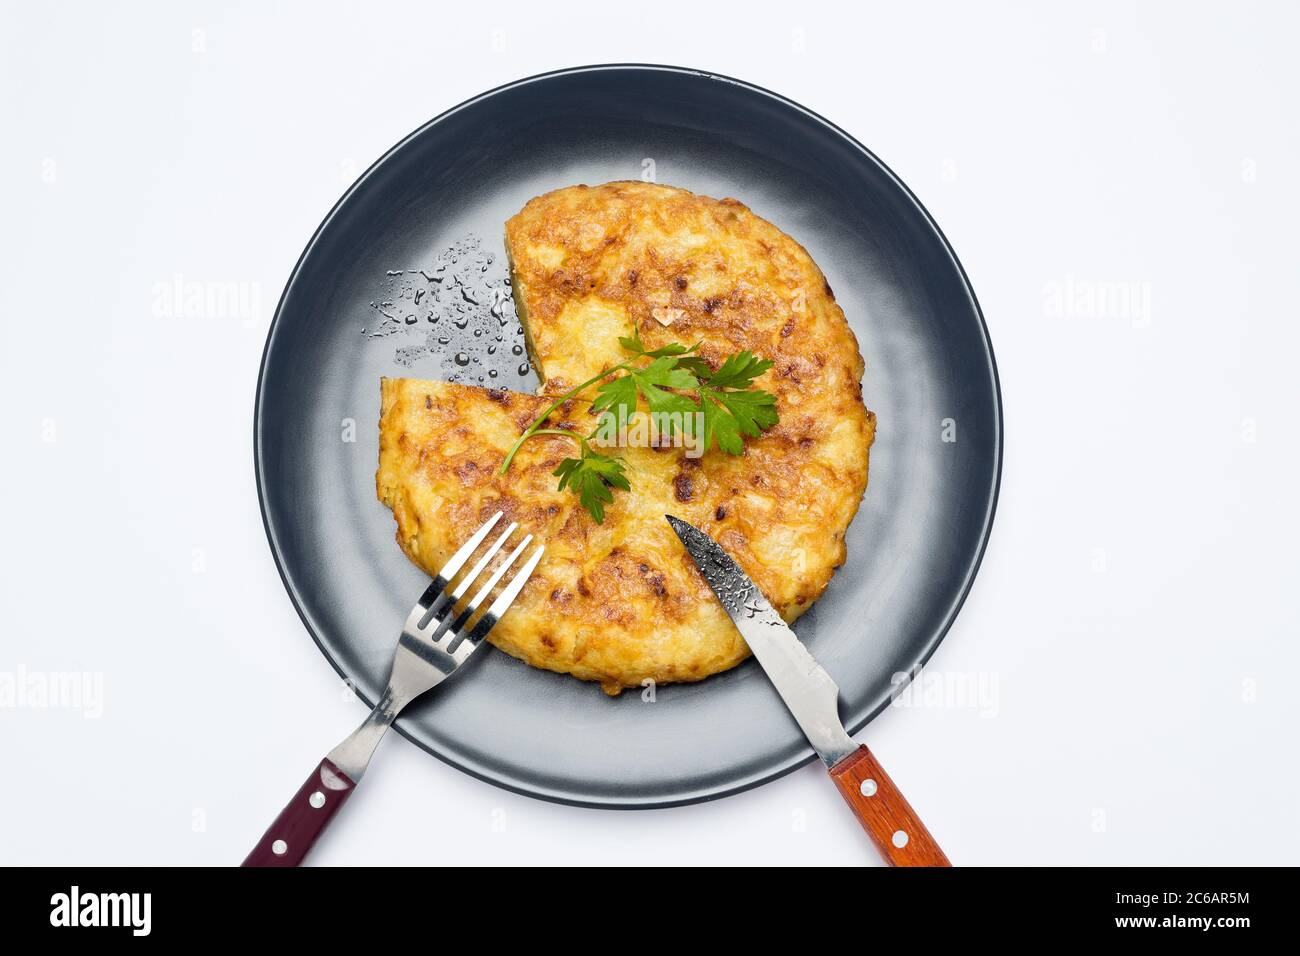 The Spanish omelette, potato omelette or Spanish omelette - also called potato omelette in Latin America, the Canary Islands or Andalusia - is an omel Stock Photo